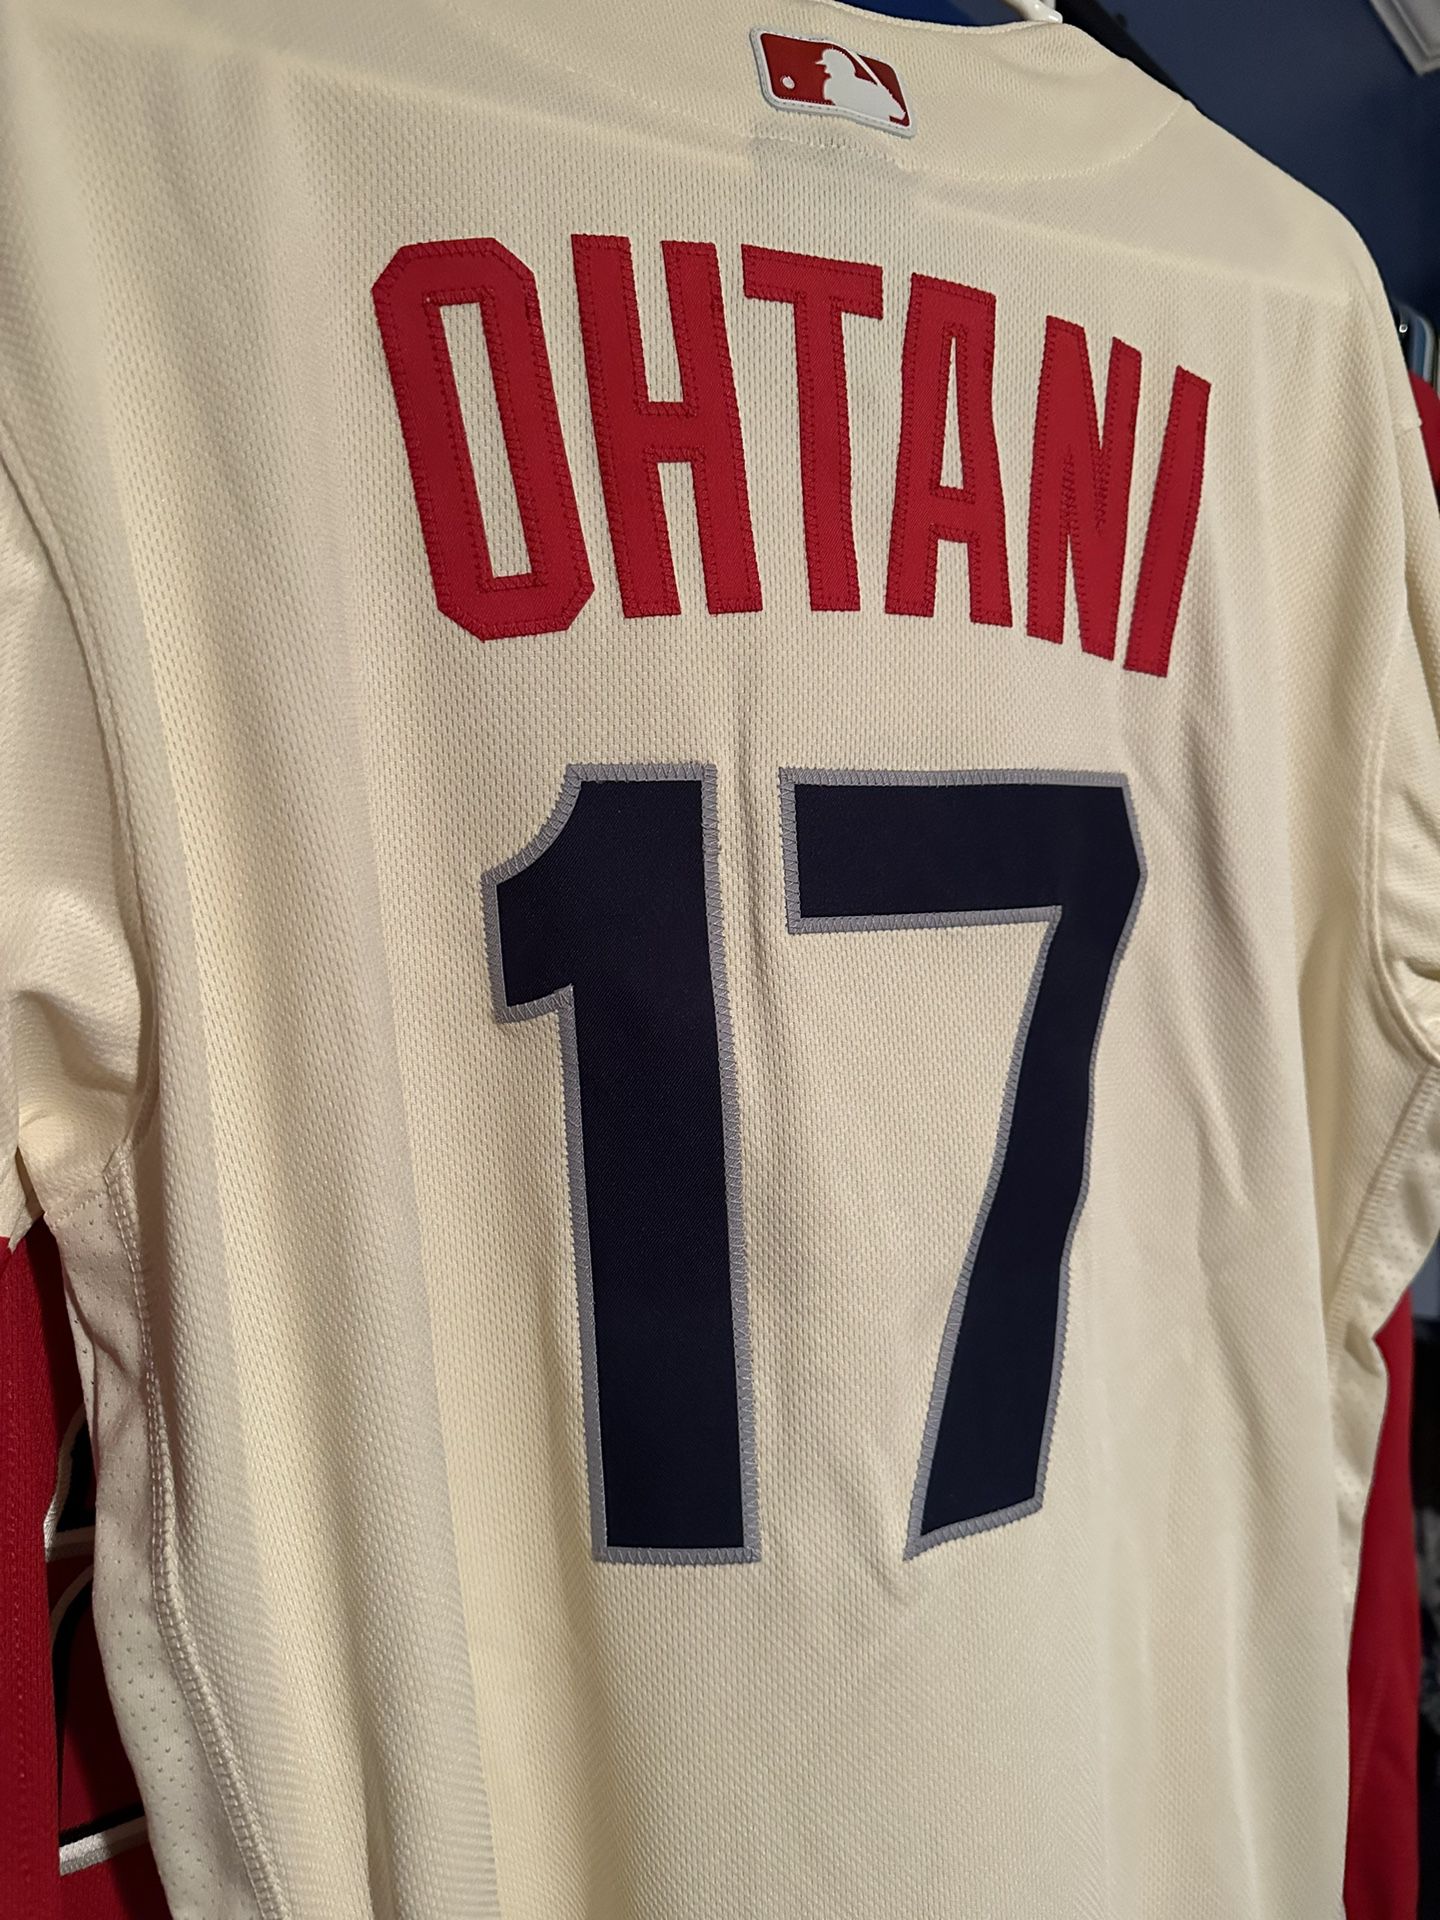 Got one of the most elusive Authentic jerseys out there!!! Ohtani City  jersey!!!! Angel Team Store doesn't even sell these in authentics!!! 😭😭  Got this jersey when Fanatics randomly stocked them. 